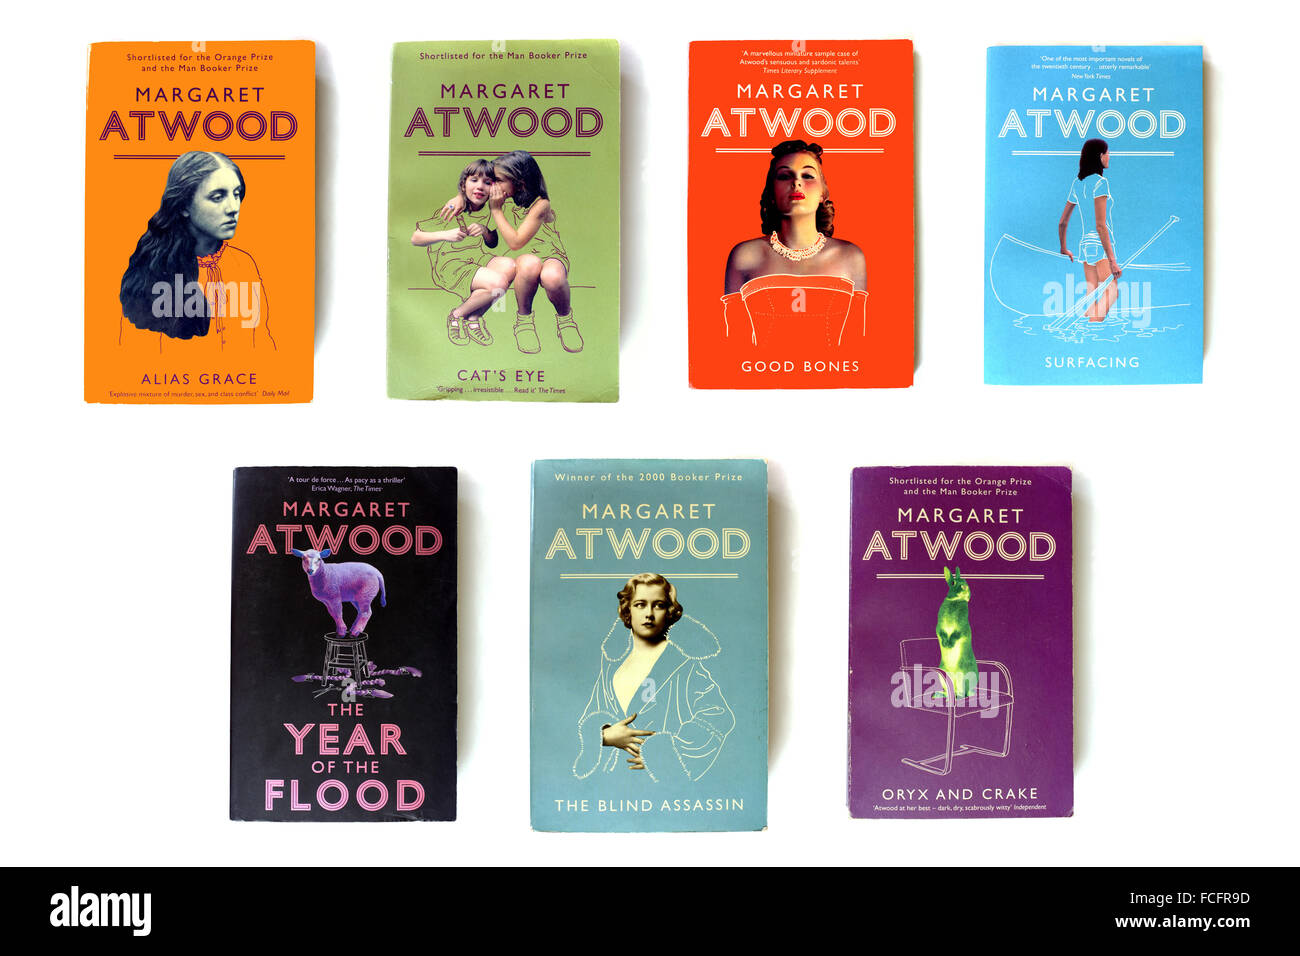 Margaret Atwood's book covers photographed against a white background Stock  Photo - Alamy